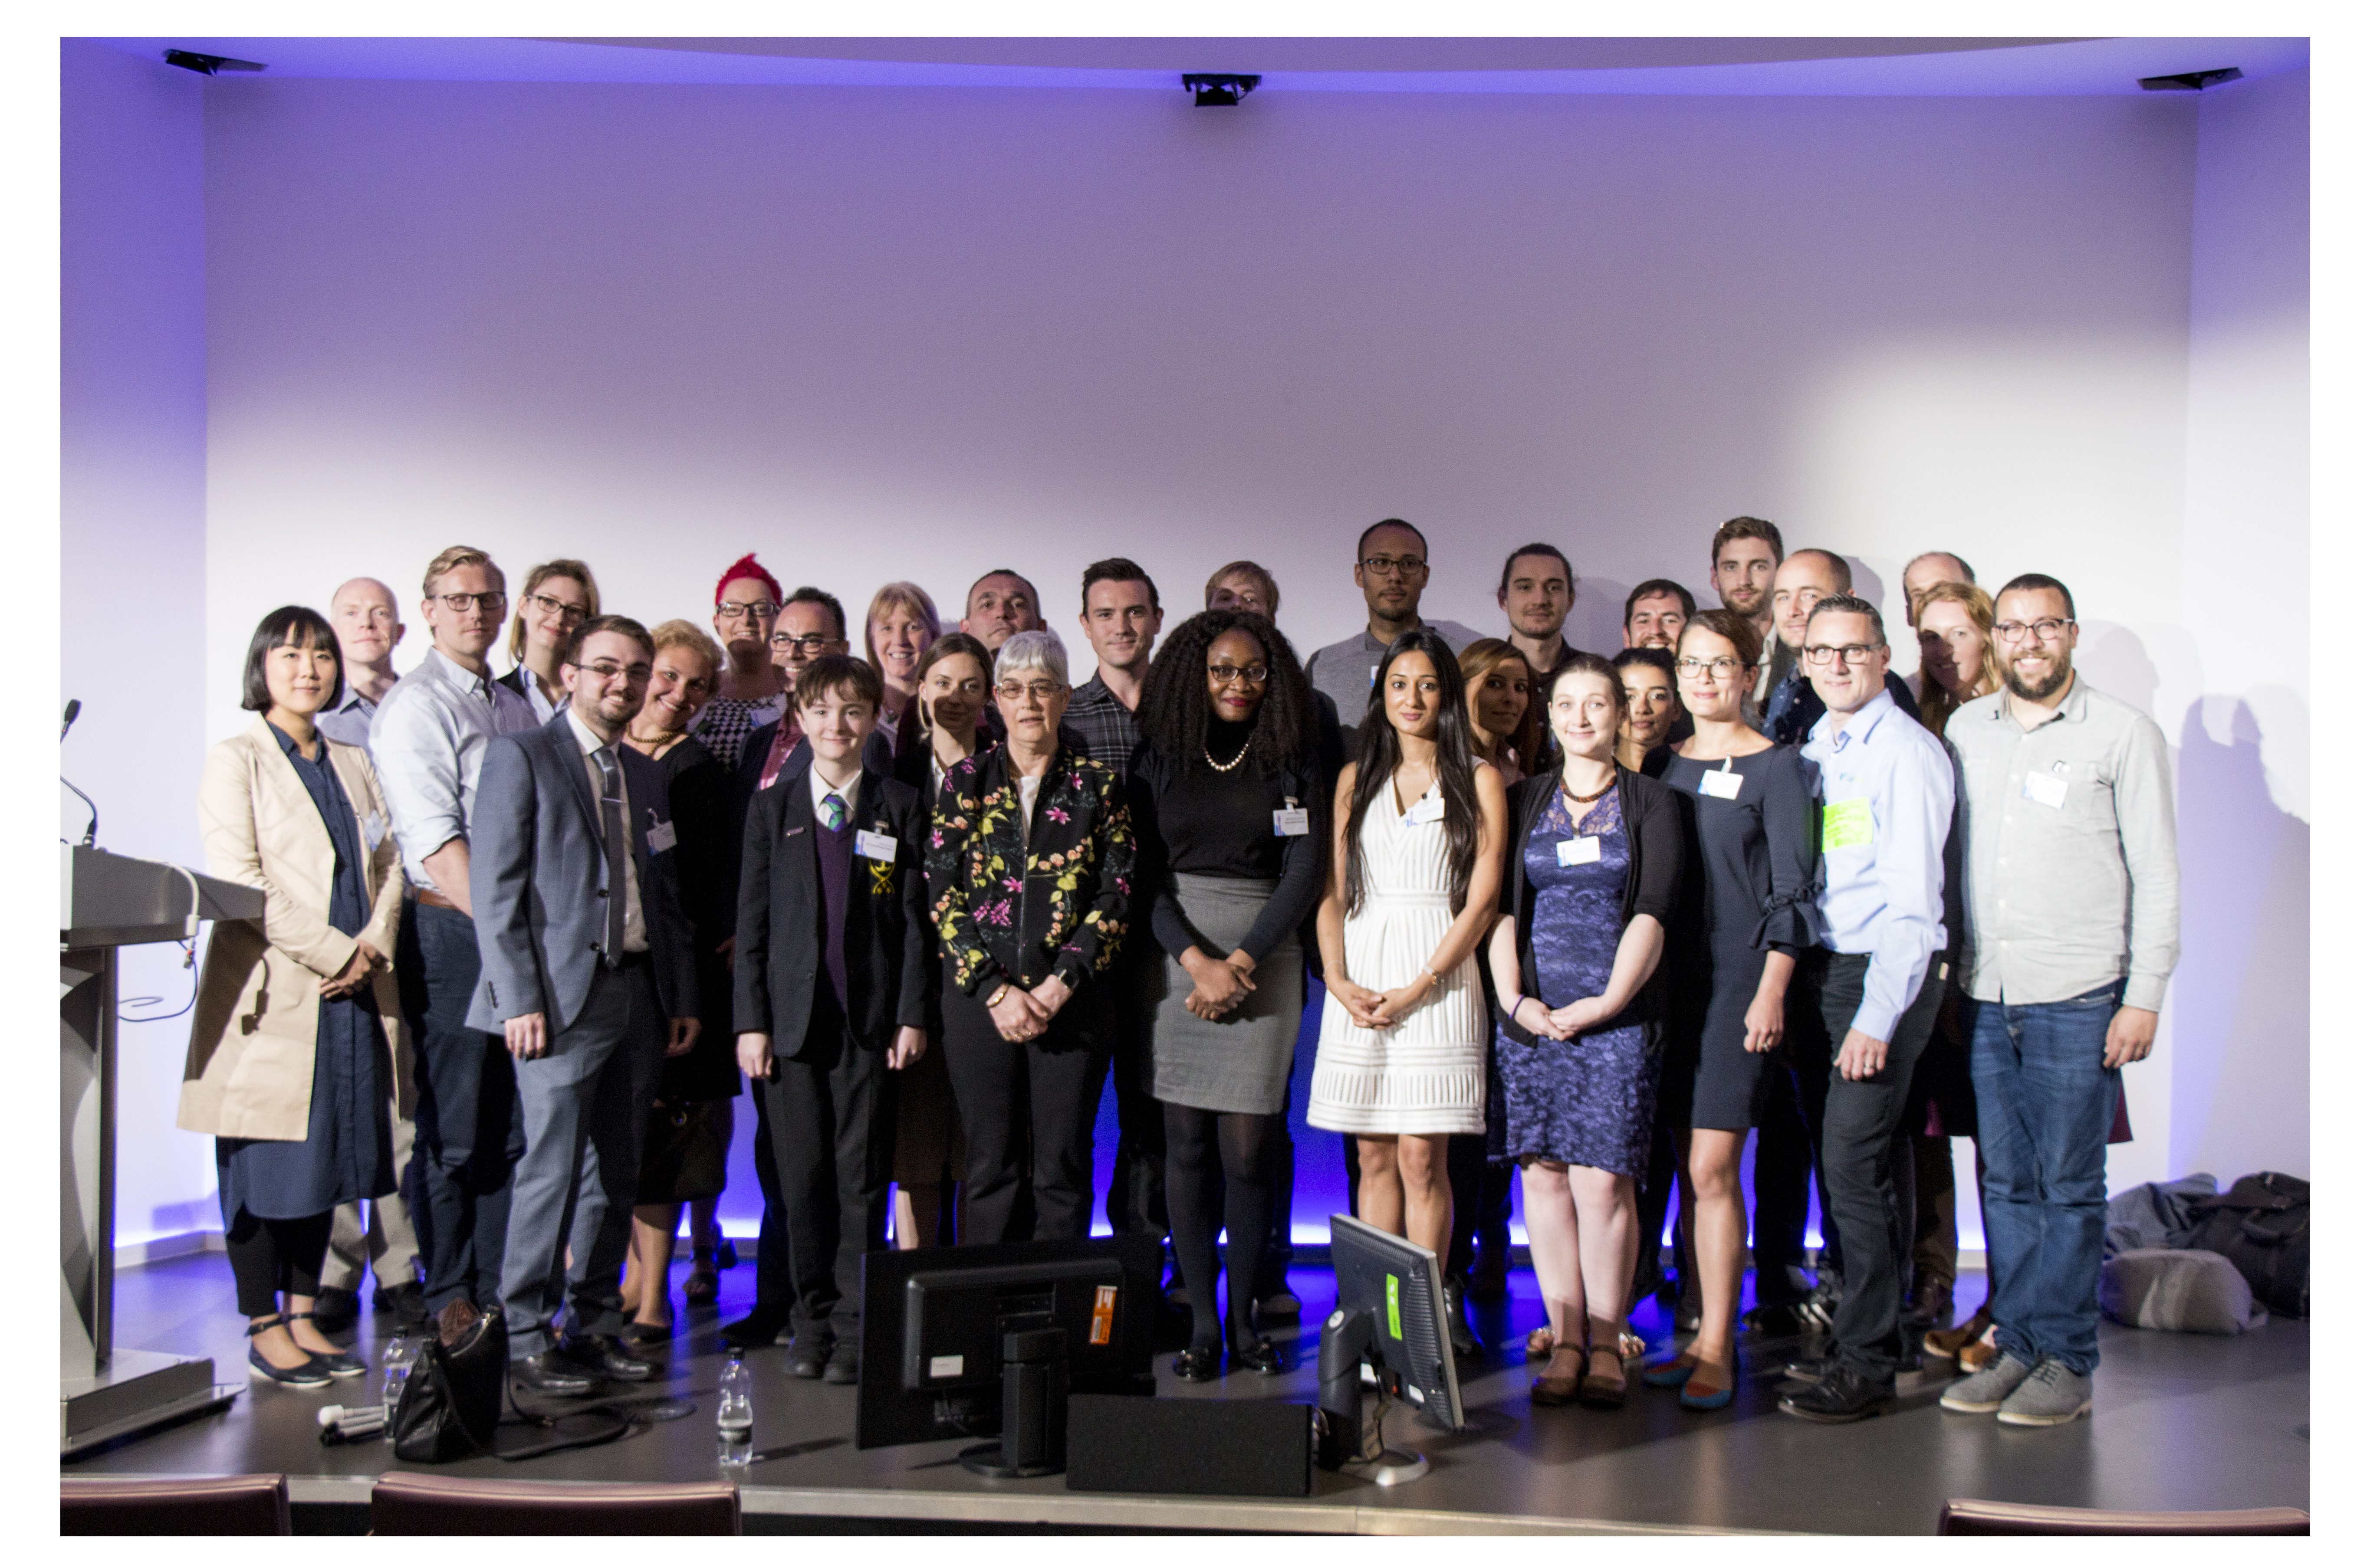 Image of the 2017 Tech4Good Awards Finalists at BT Tower